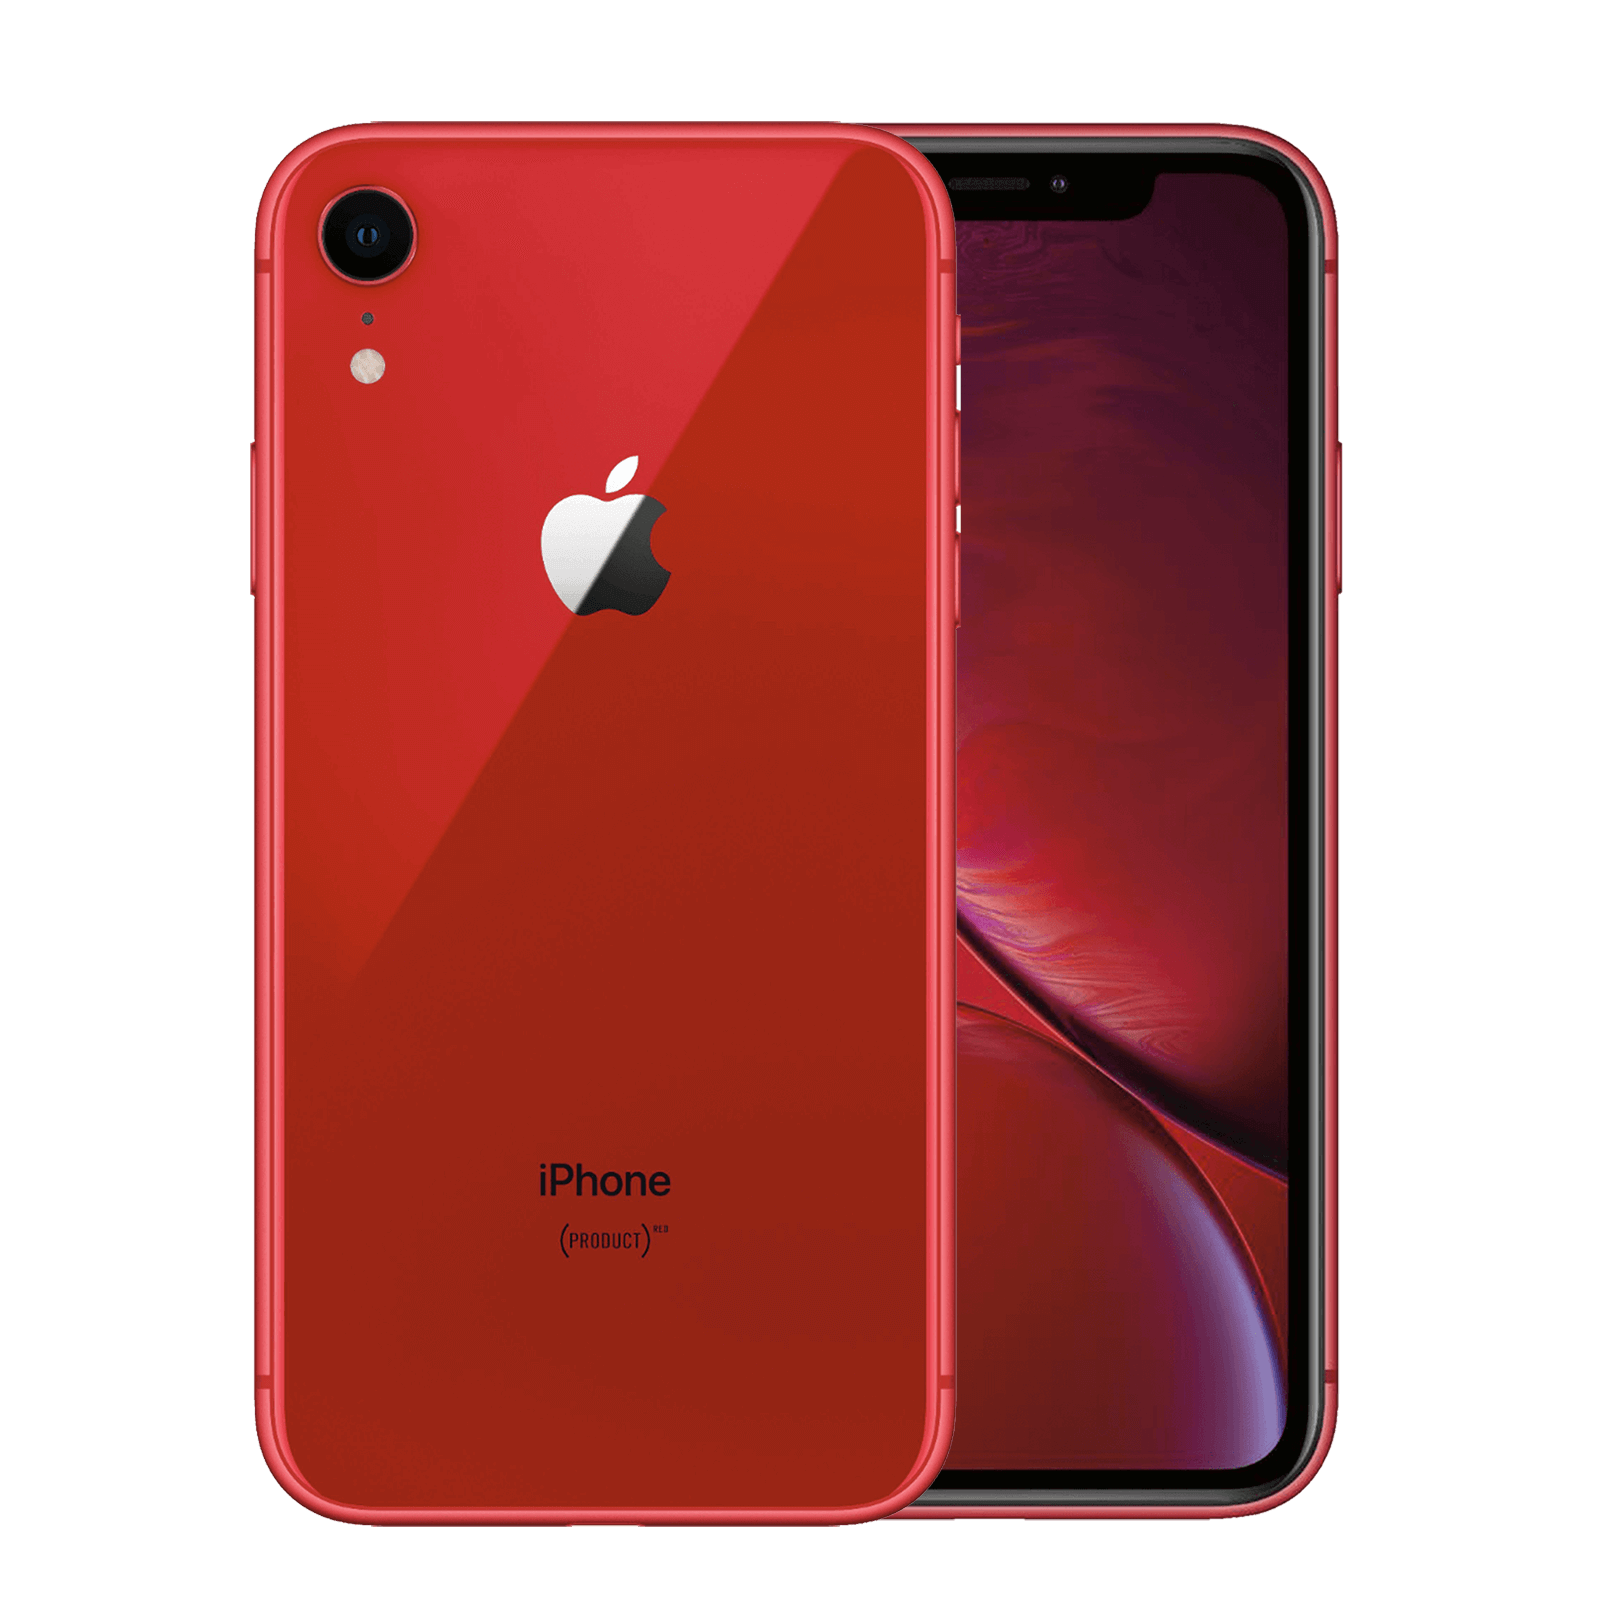 Apple iPhone XR (128GB) Unlocked/AT&T/Verizon/T-Mobile - Mac Me an Offer